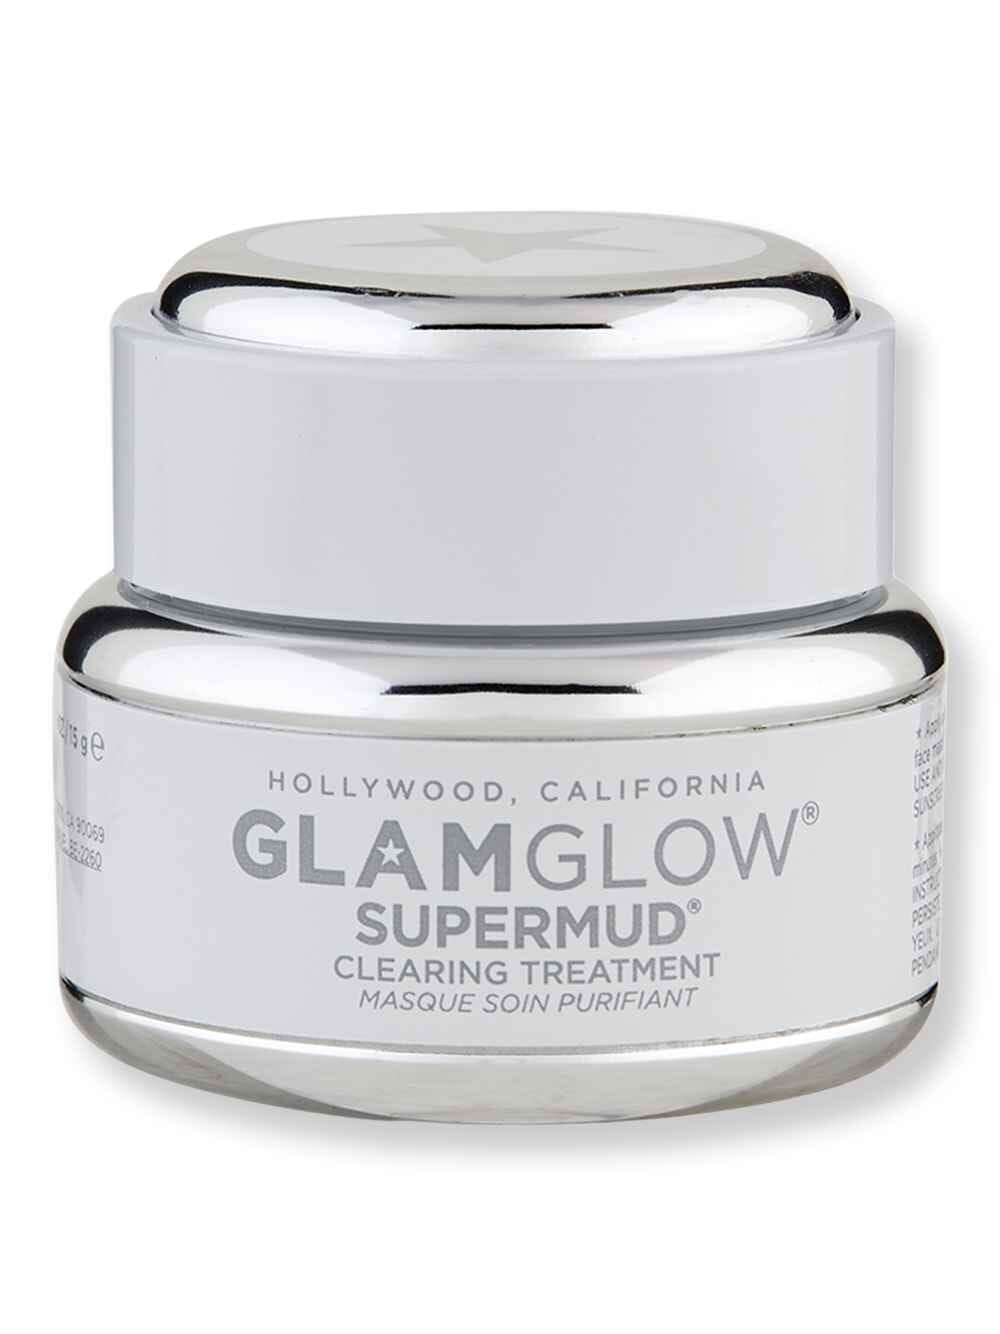 Glamglow Glamglow SuperMud Clearing Treatment .5 oz15 g Skin Care Treatments 